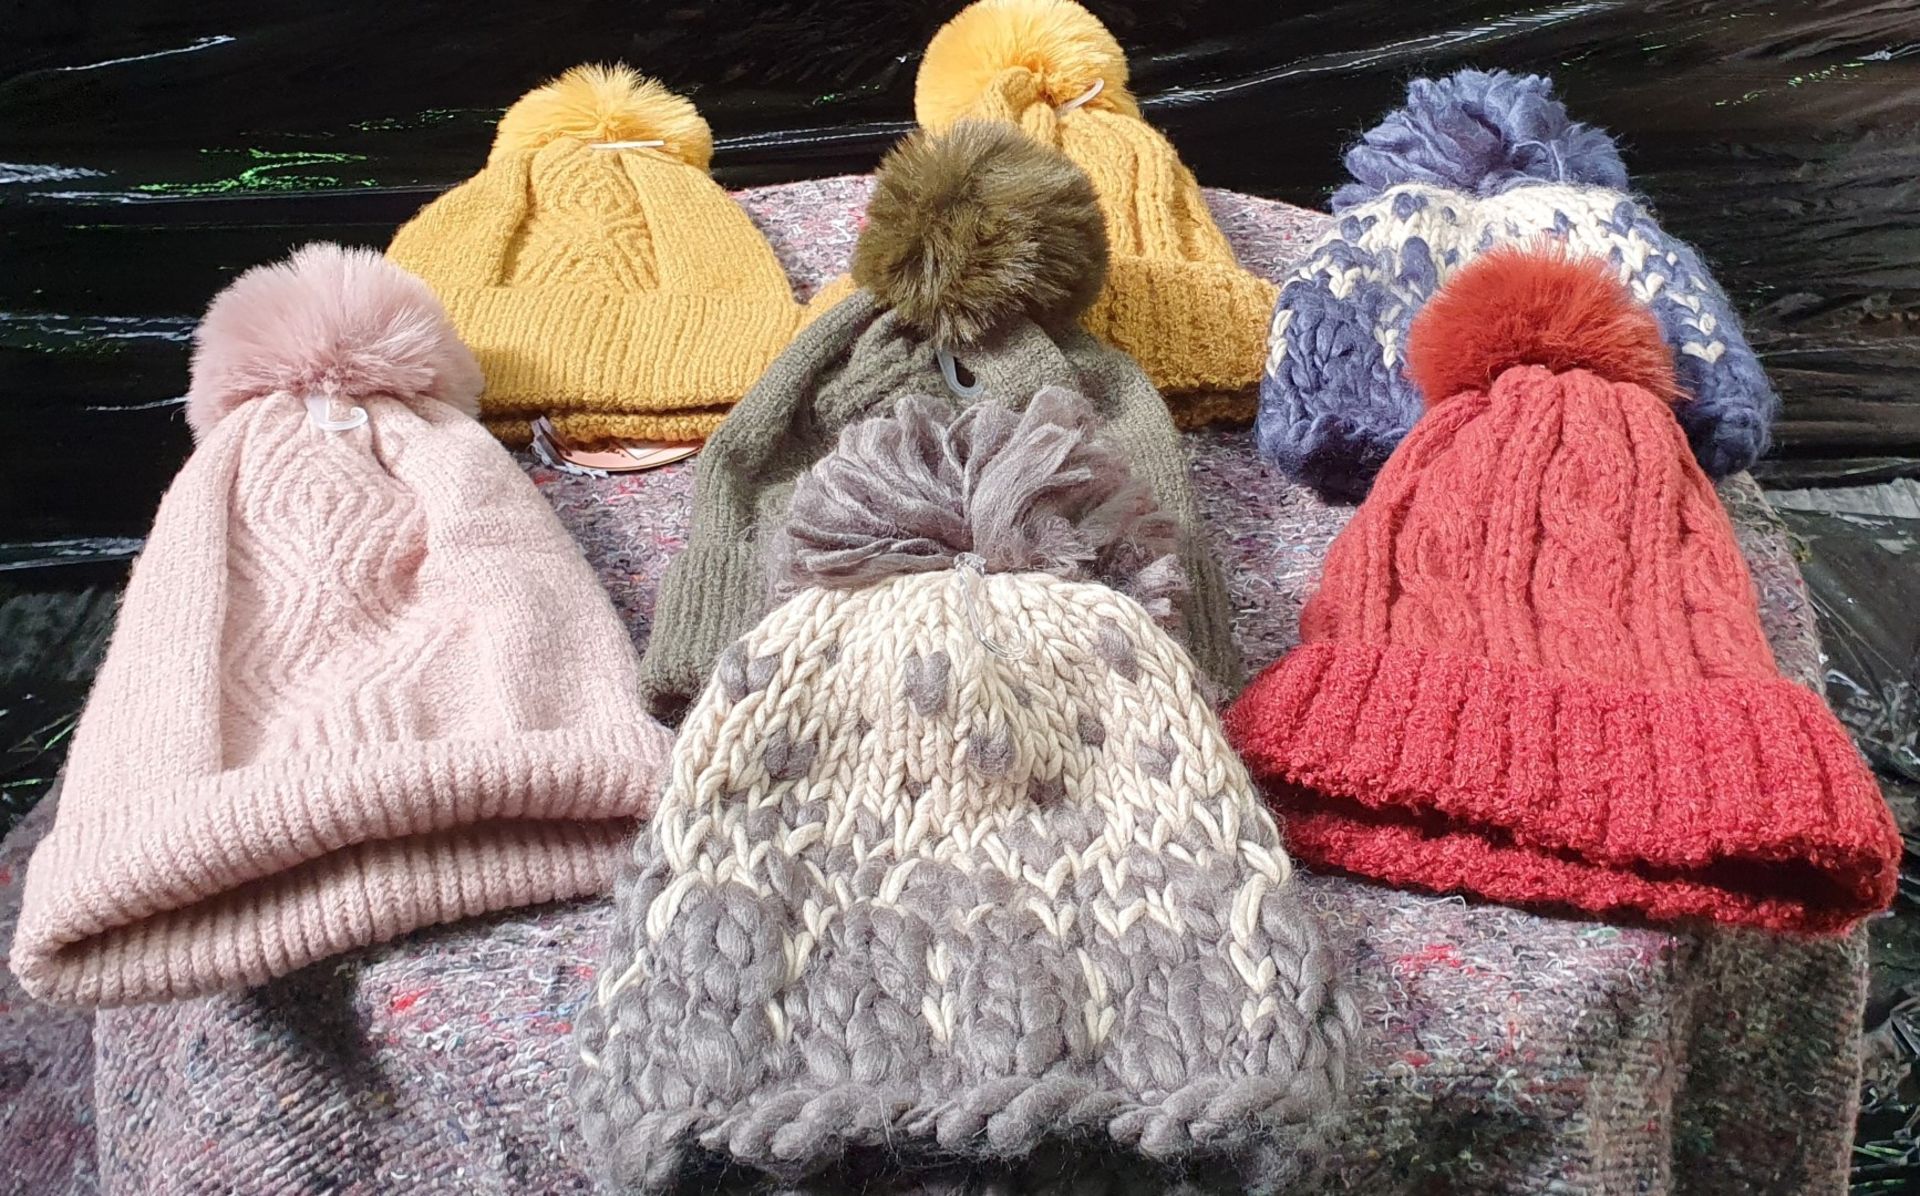 7 x Powder Adults Woolly Bobble Hats - New Stock - RRP Between £25-30 Each- Ref: TCH241 - CL840 -